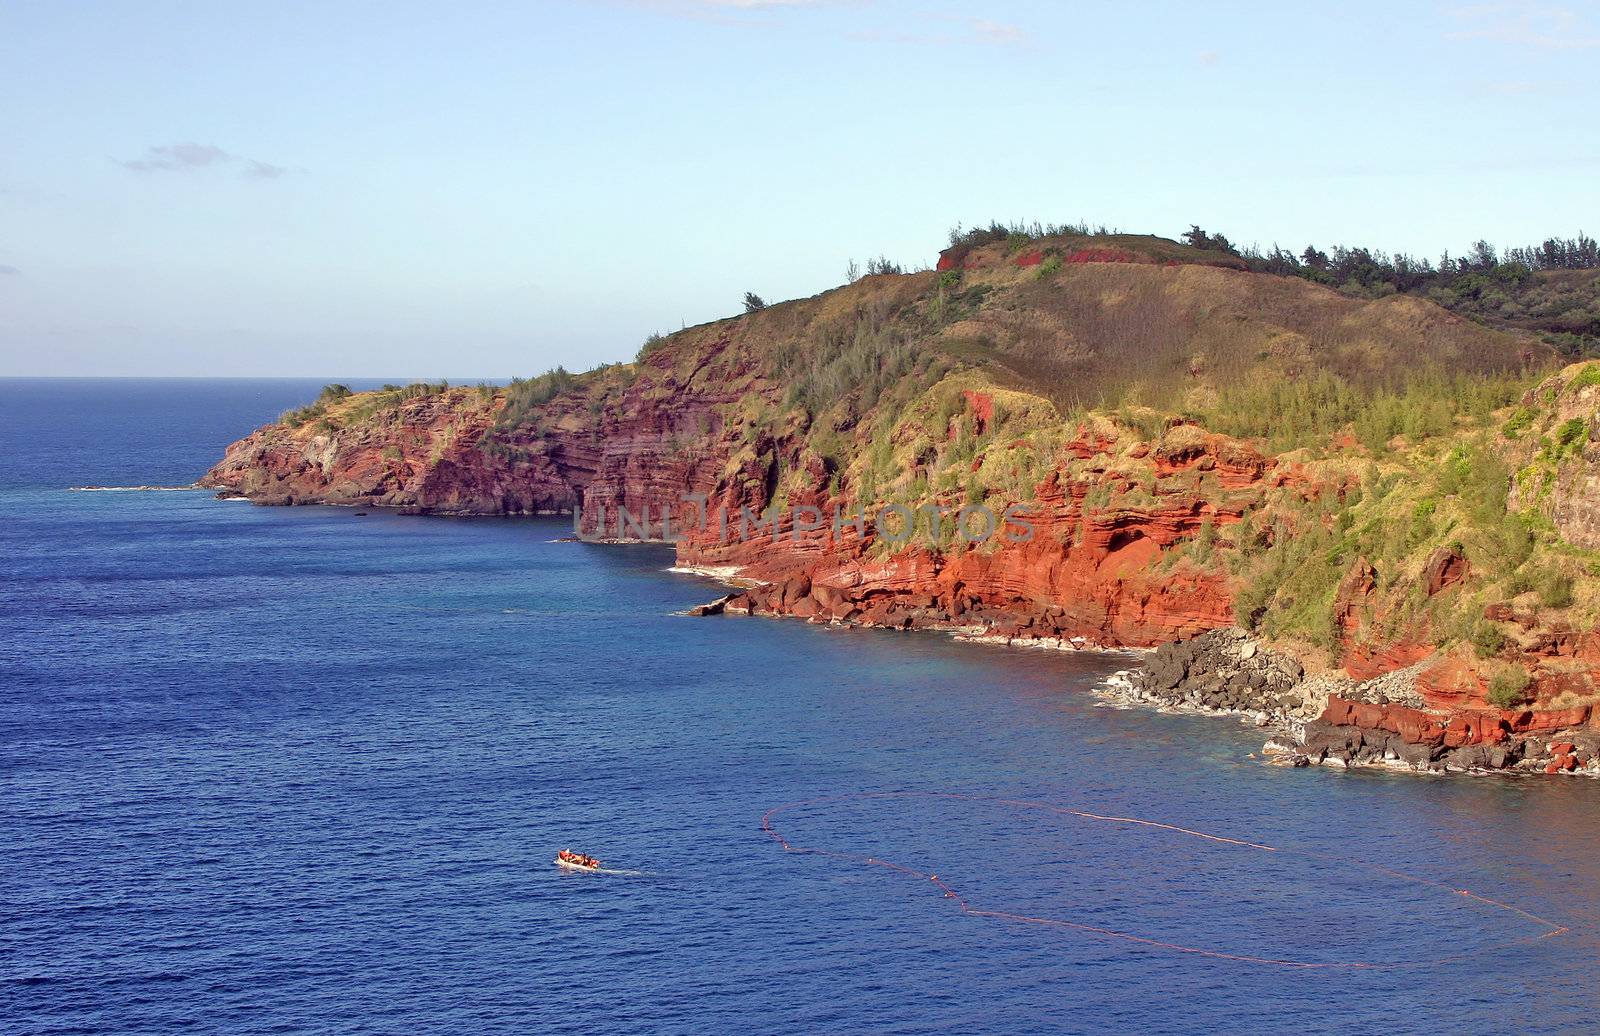 Maui red cliffs and water with a boat